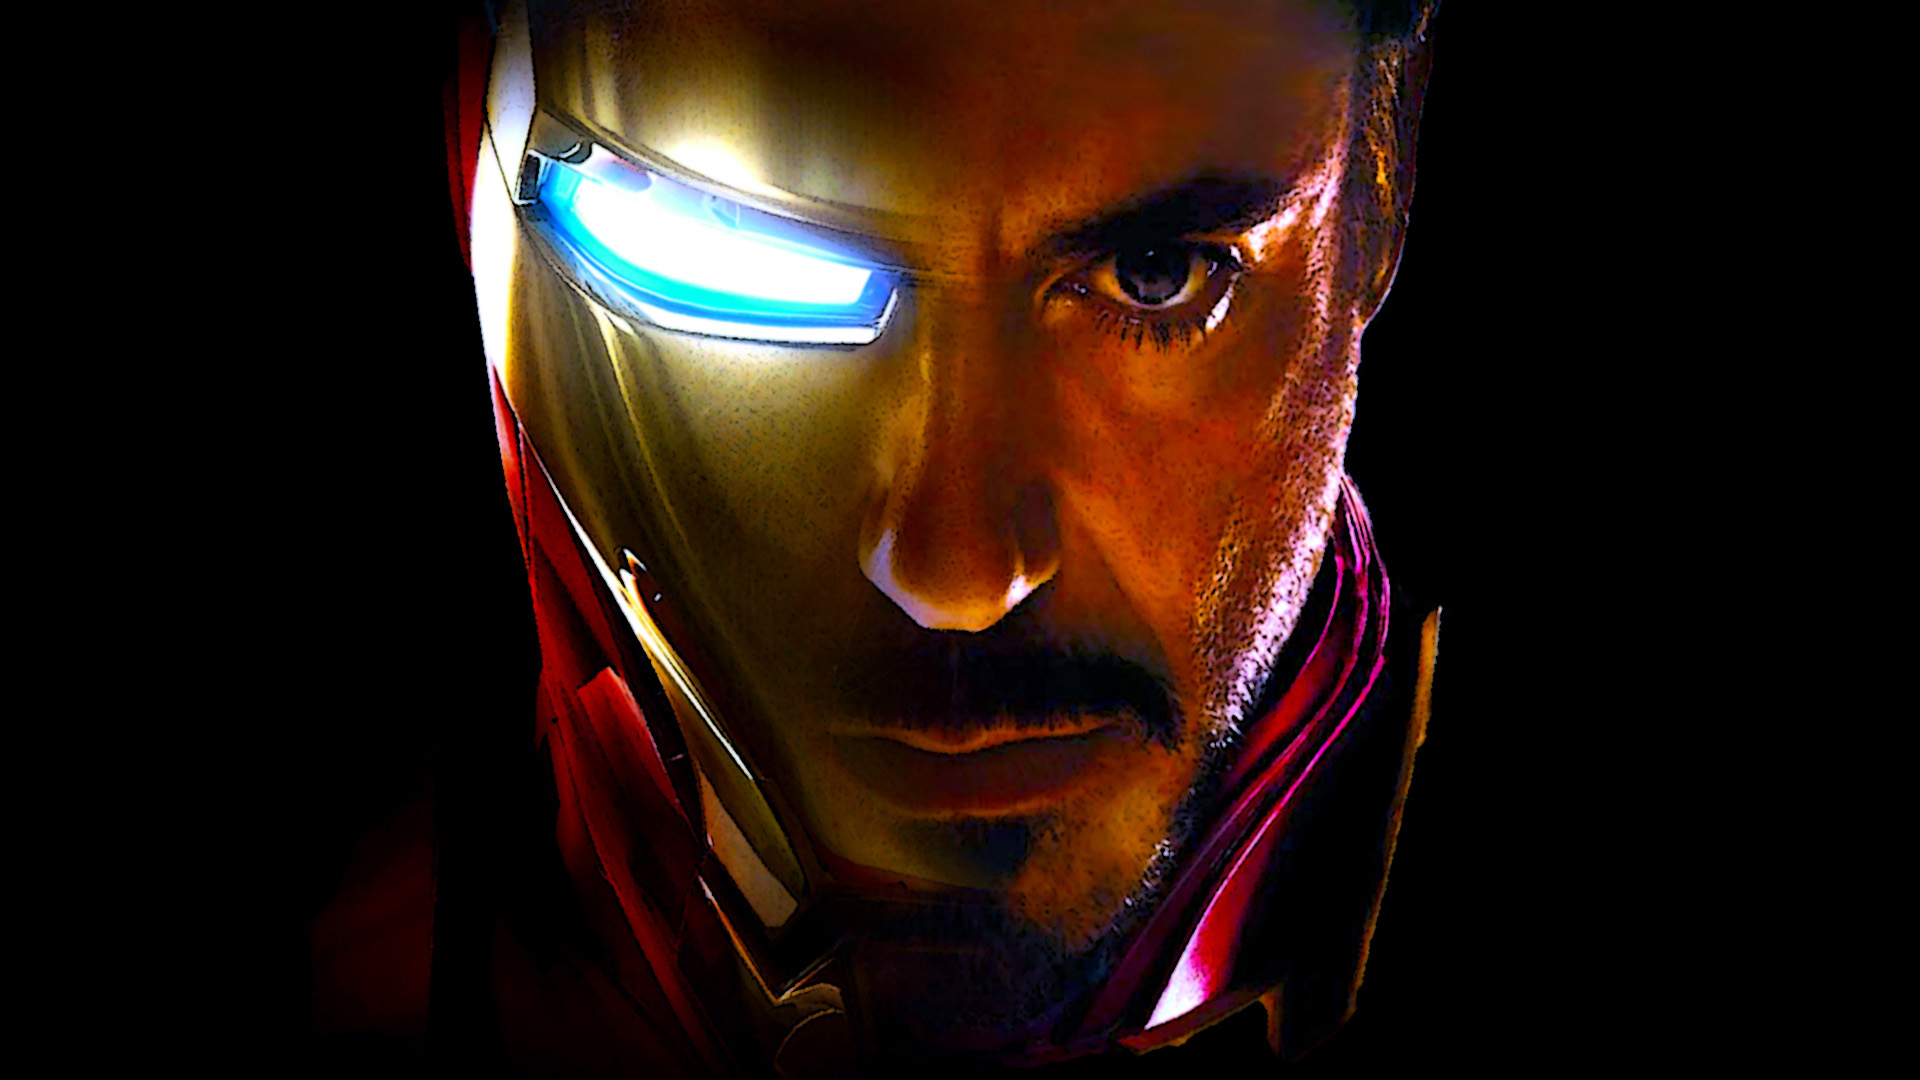 69 Iron Man Wallpapers For Download In HD 1920x1080